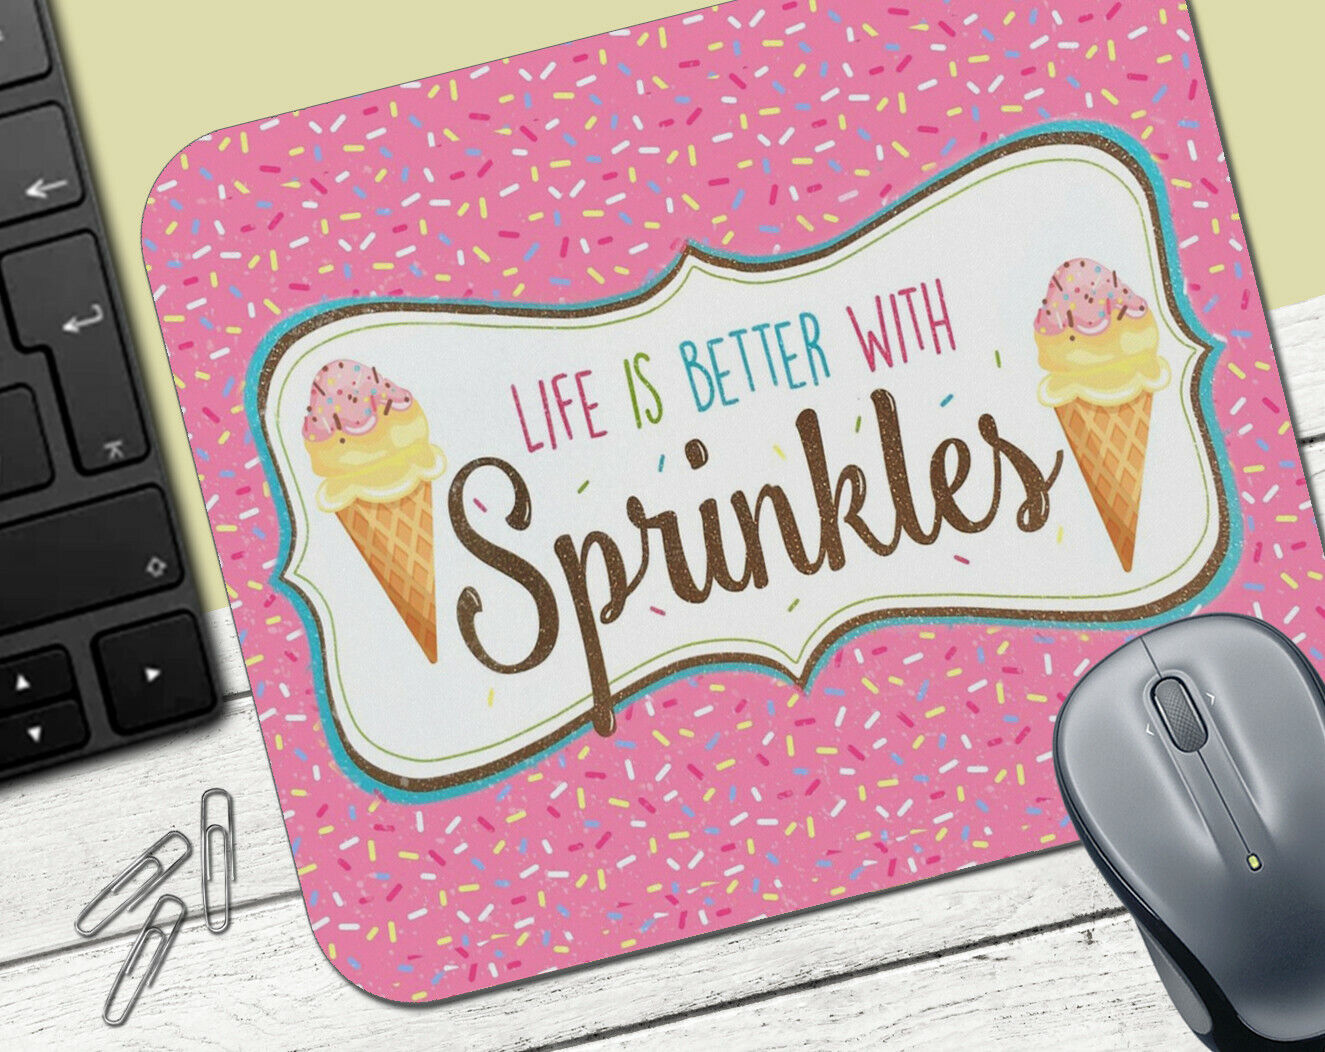 Sprinkles #2 - MOUSE PAD - Life is Better with Sprinkles Funny Novelty Gag Gift